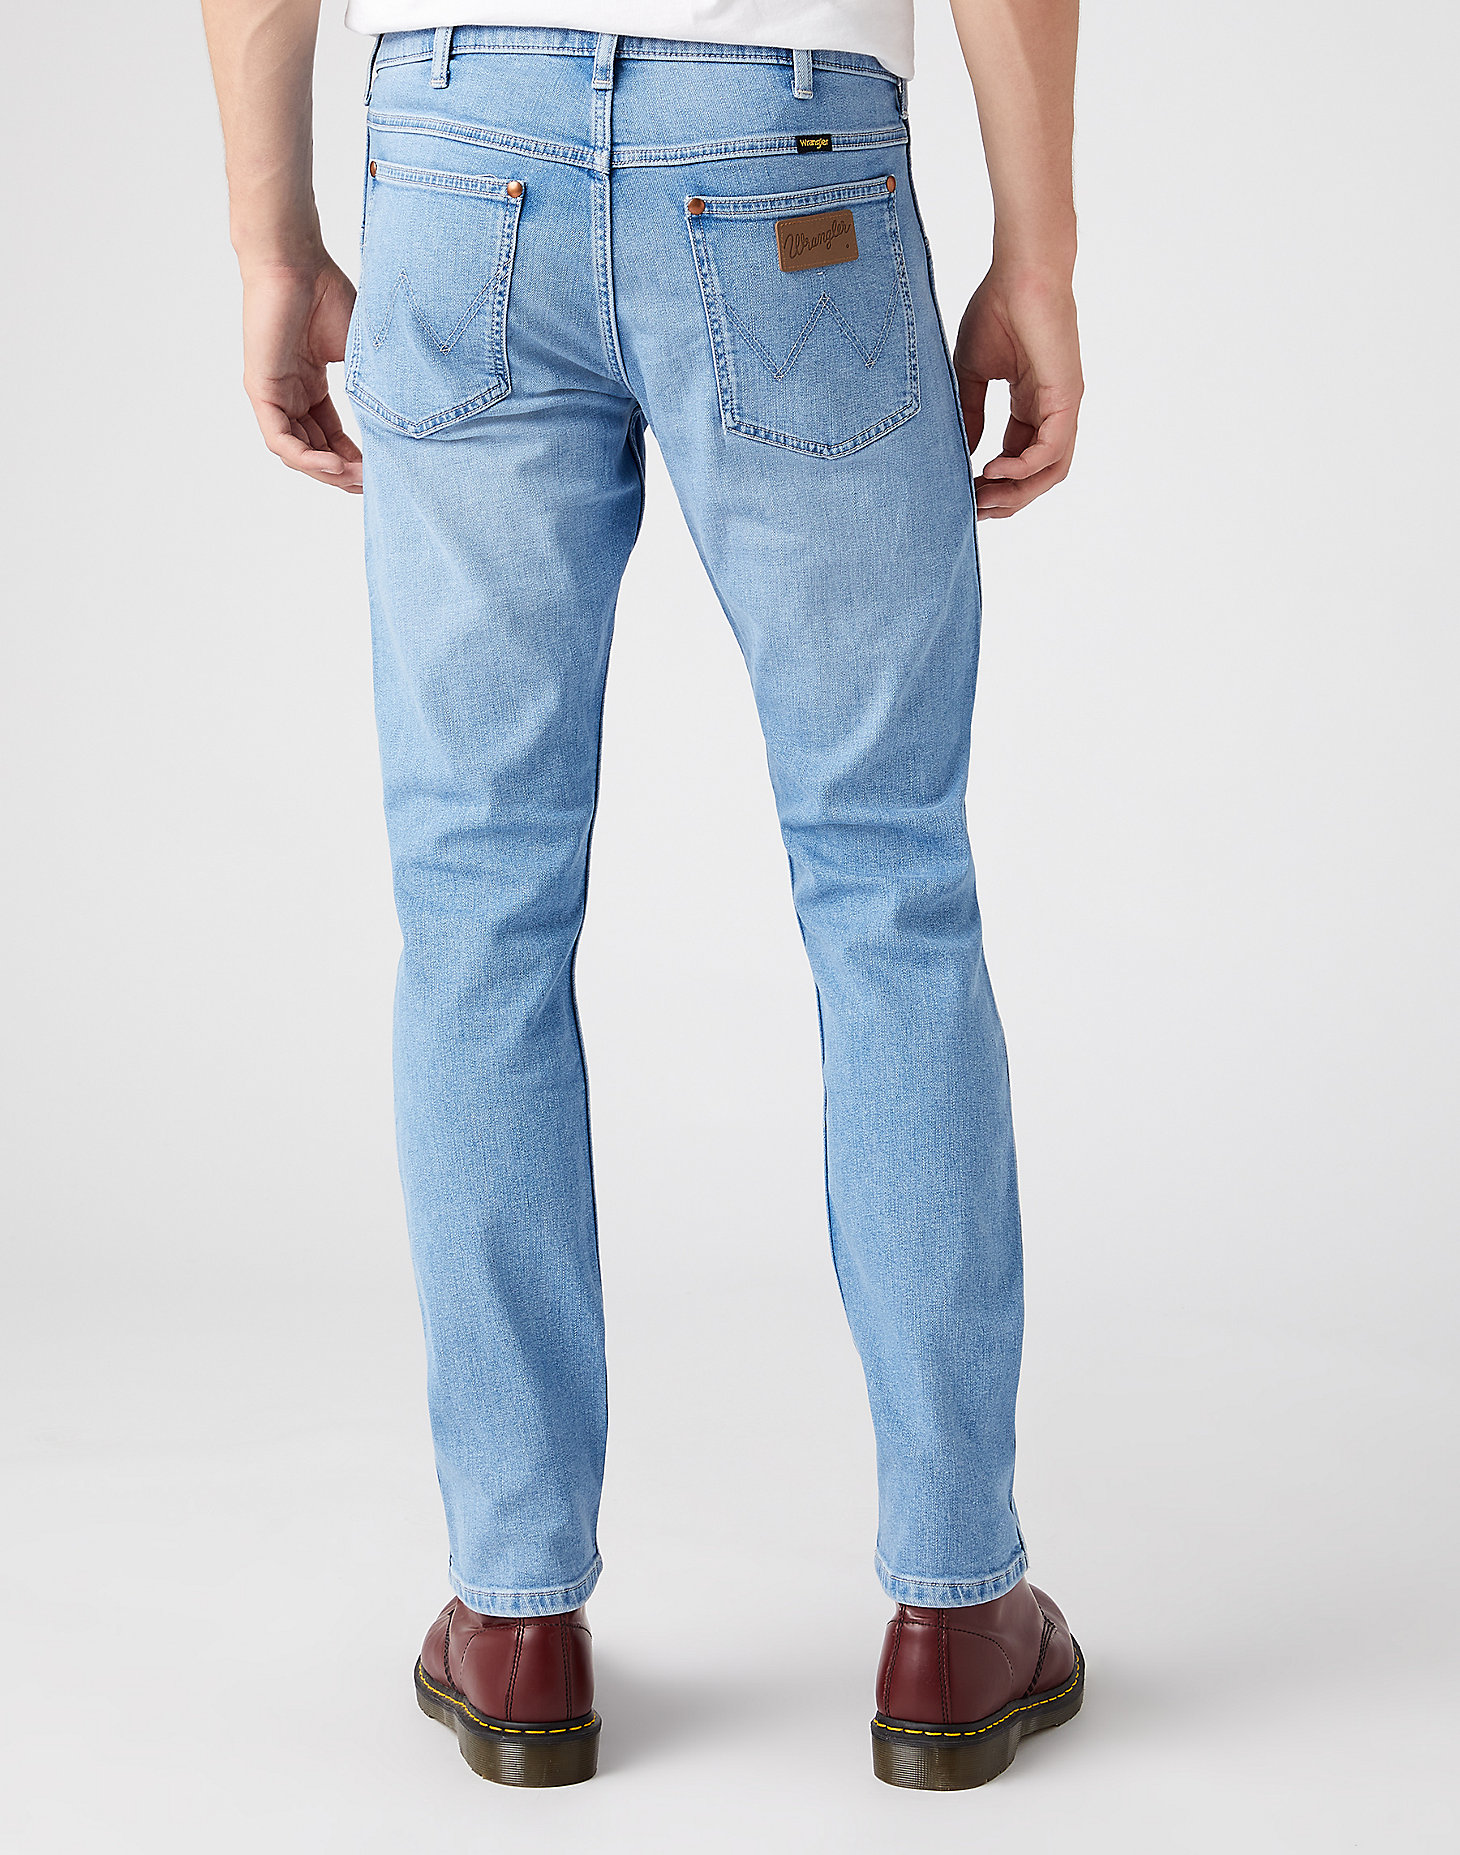 Icons 11MWZ Western Slim Jeans in Blue Champ alternative view 2